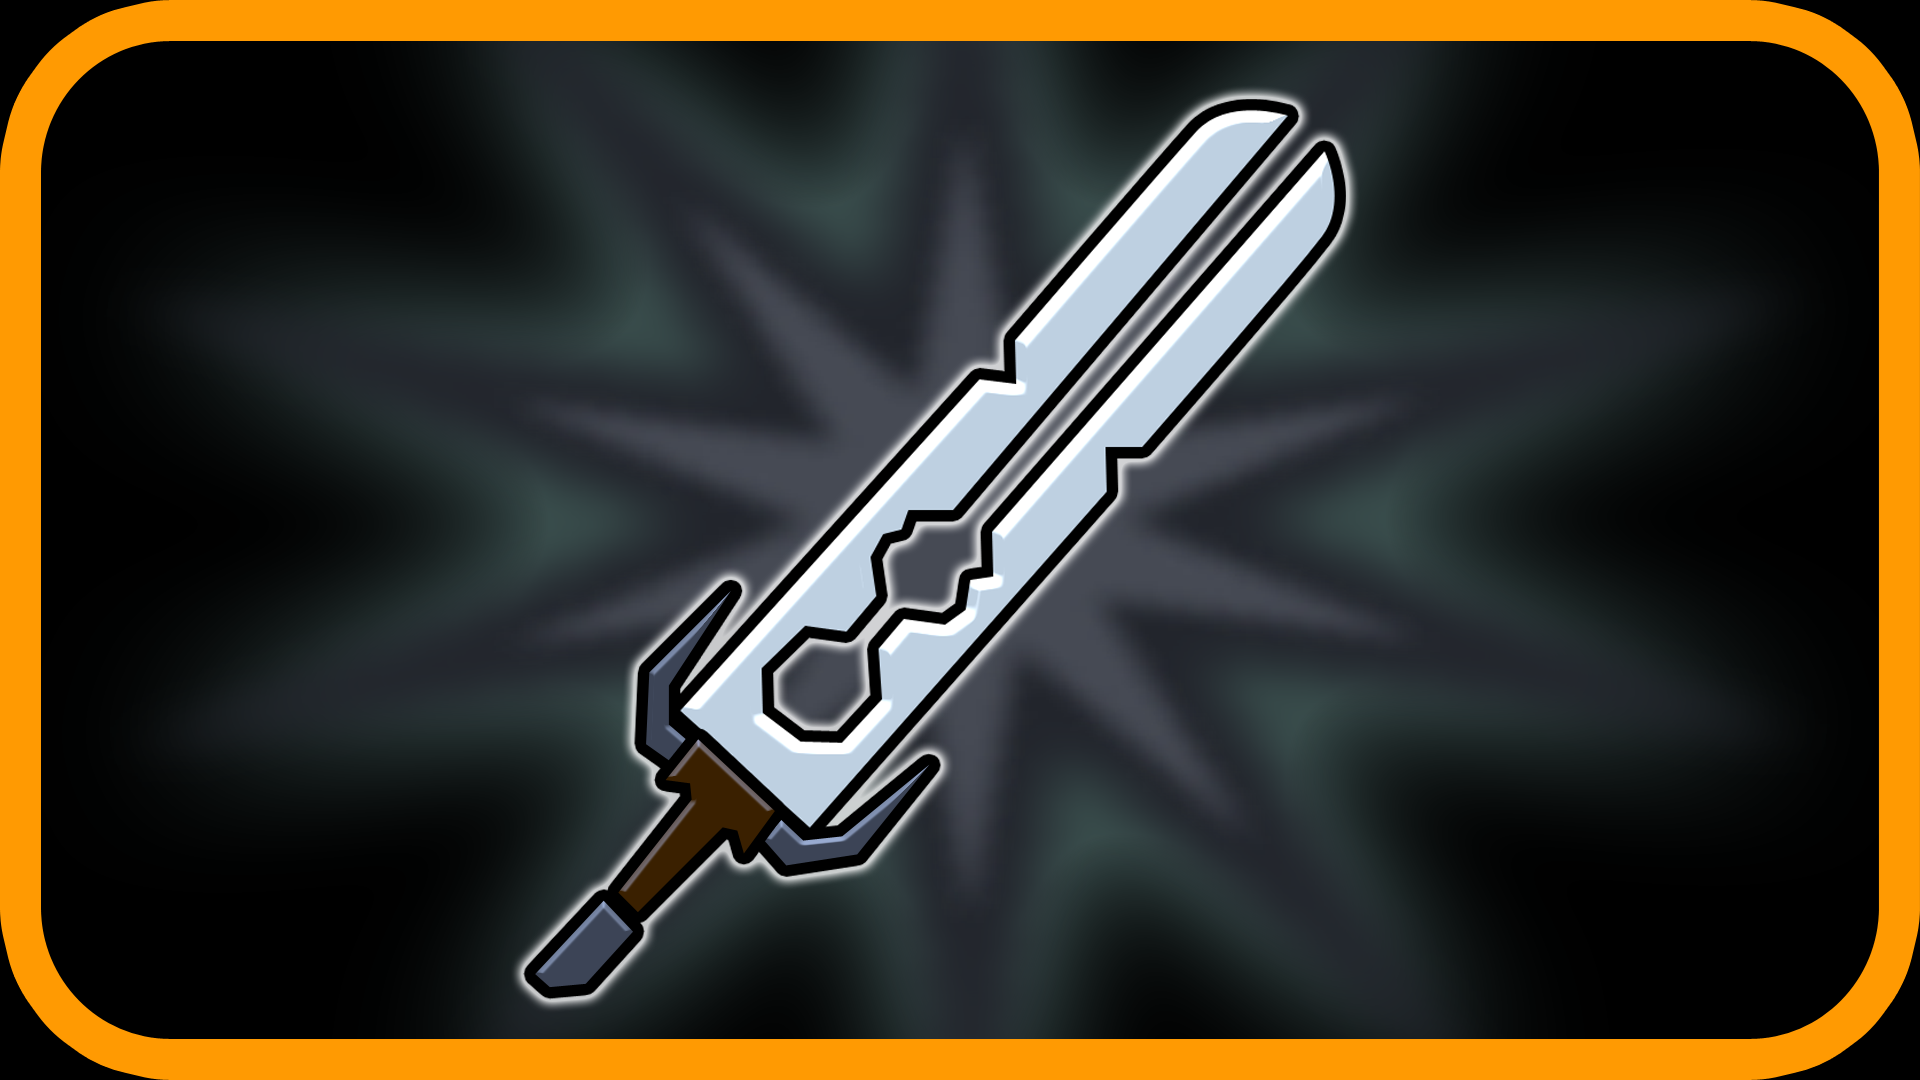 Icon for Weapon Unlocked: Infinity Sword!